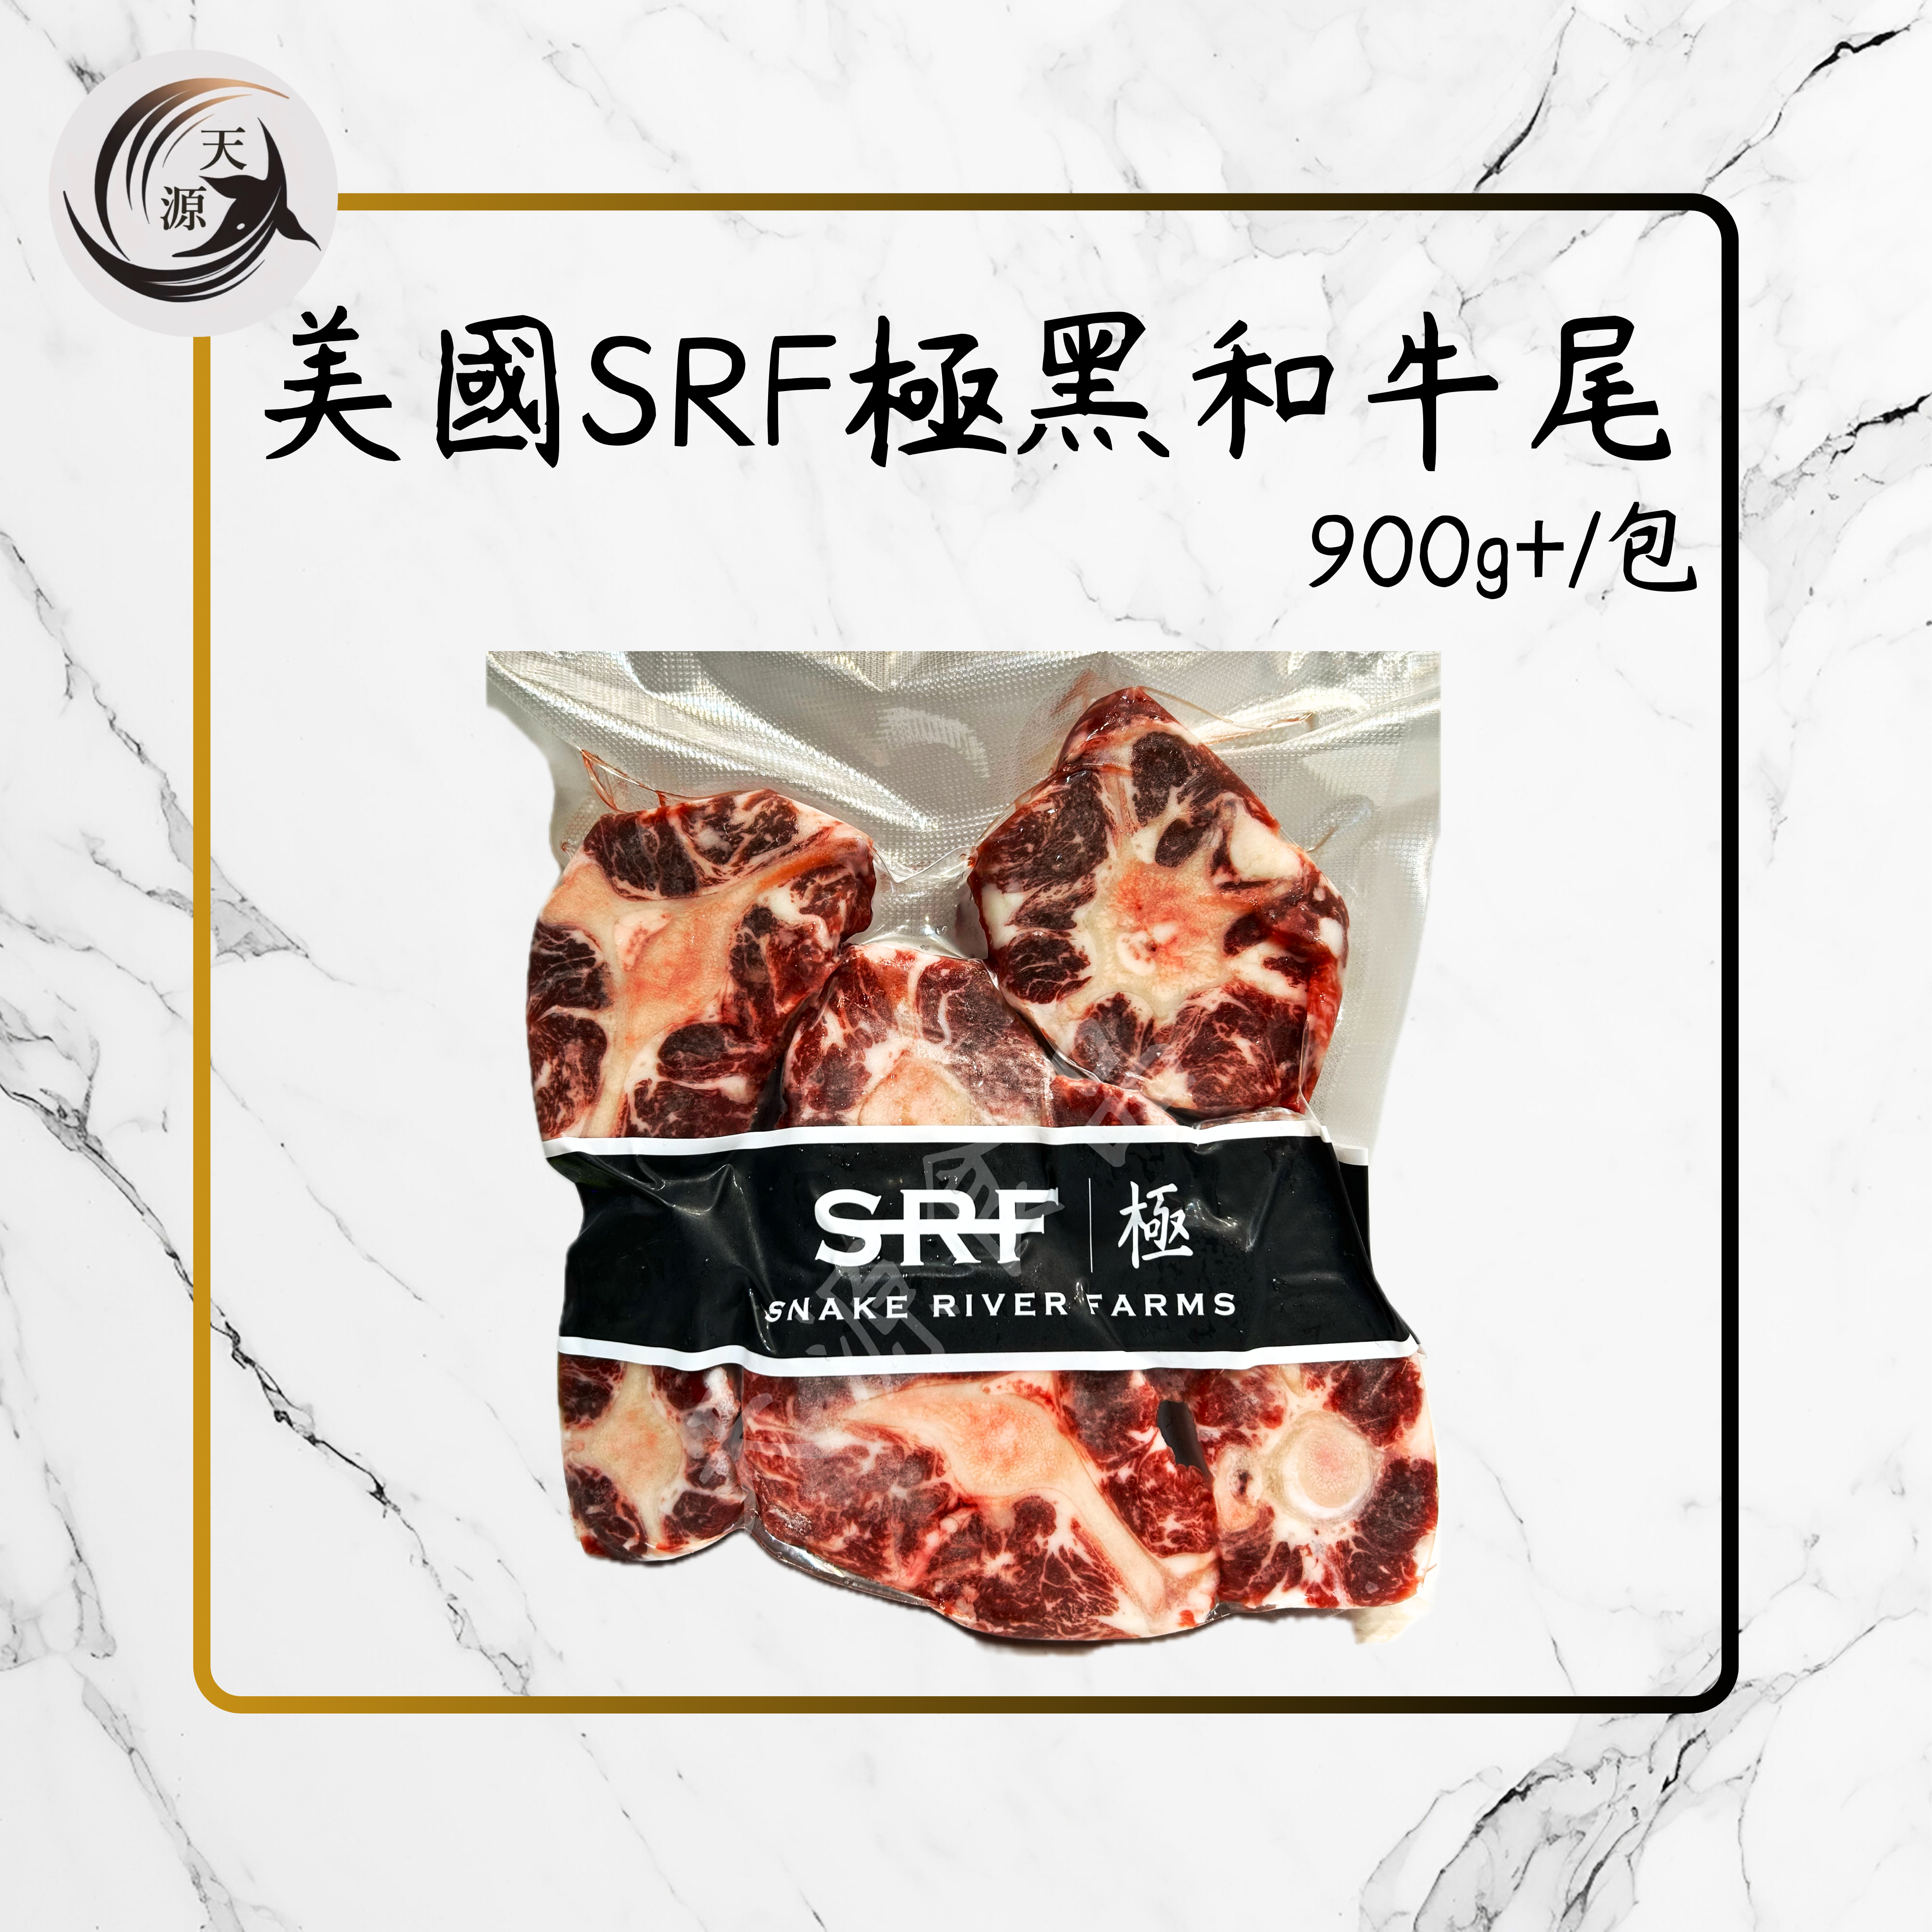 American SRF extremely black wagyu oxtail